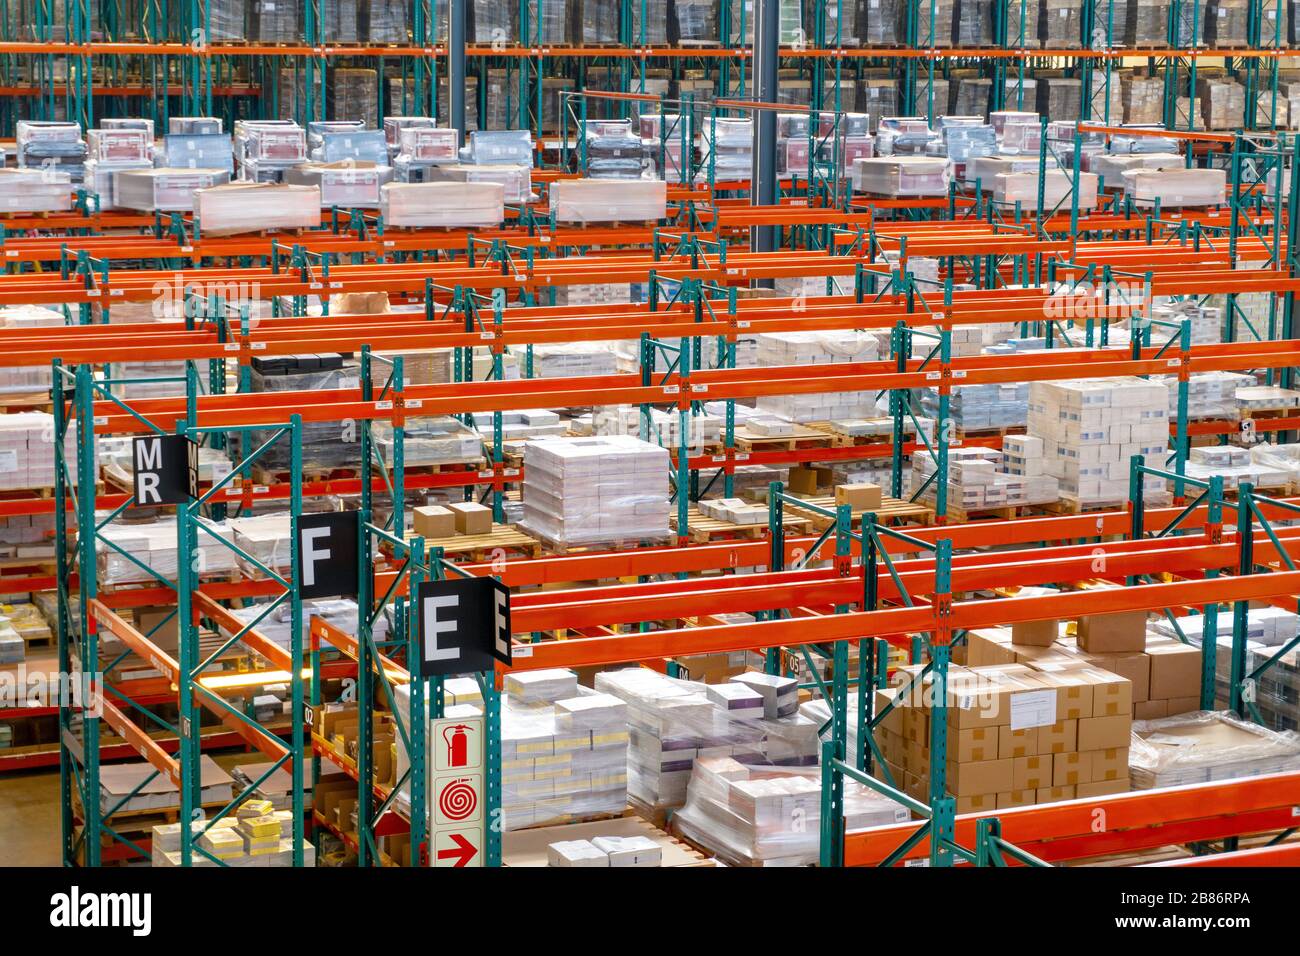 Big warehouse with red racks full of boxes waiting for shipment Stock Photo